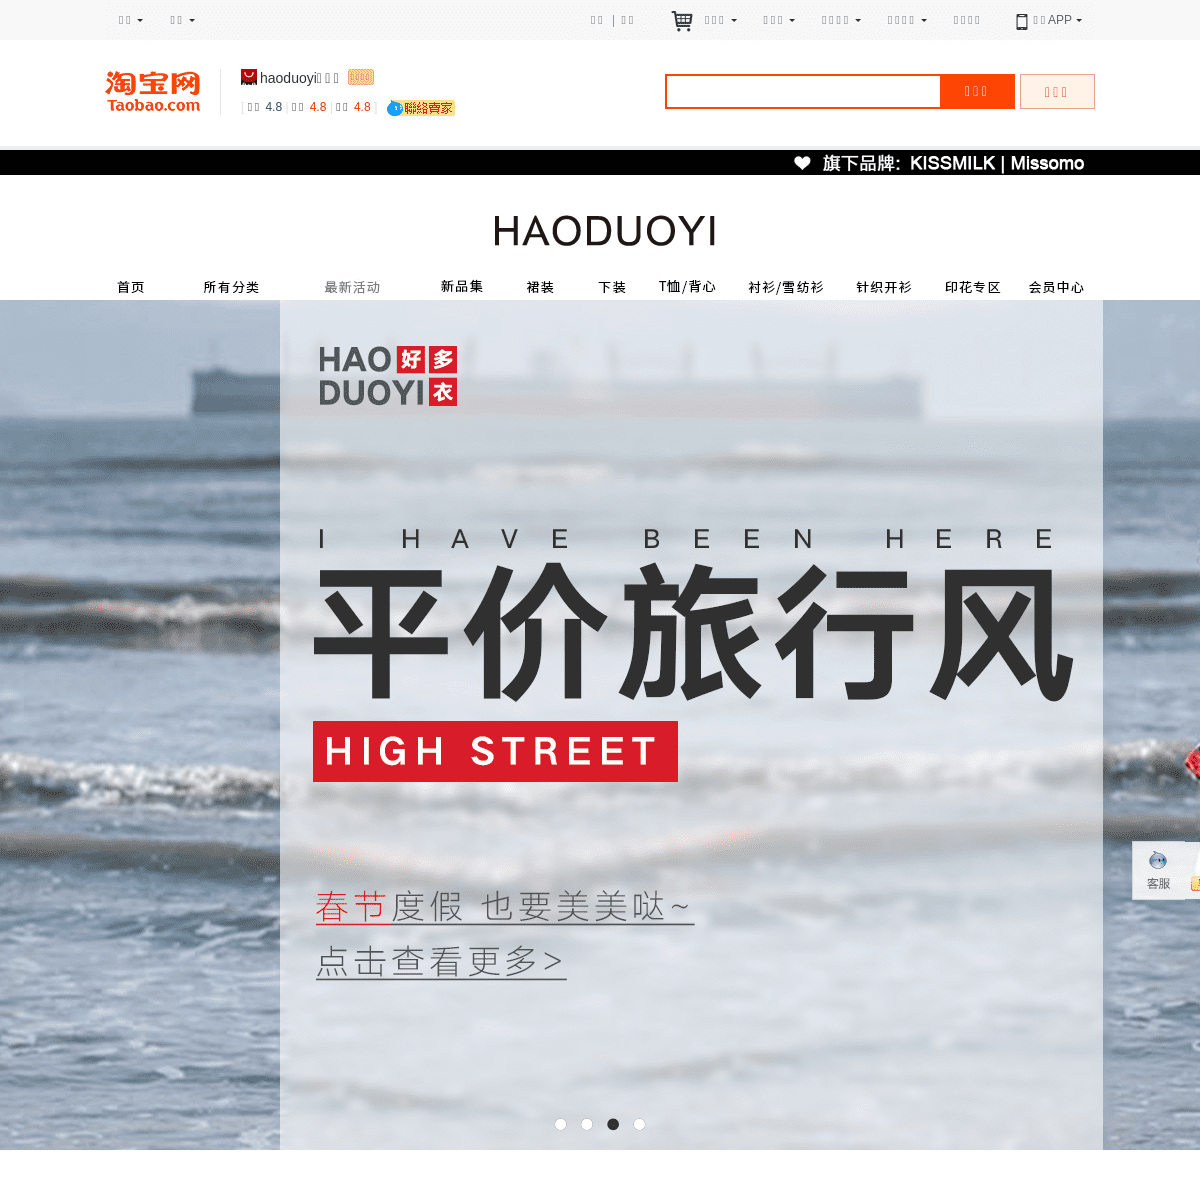 A complete backup of haoduoyifs.tmall.com